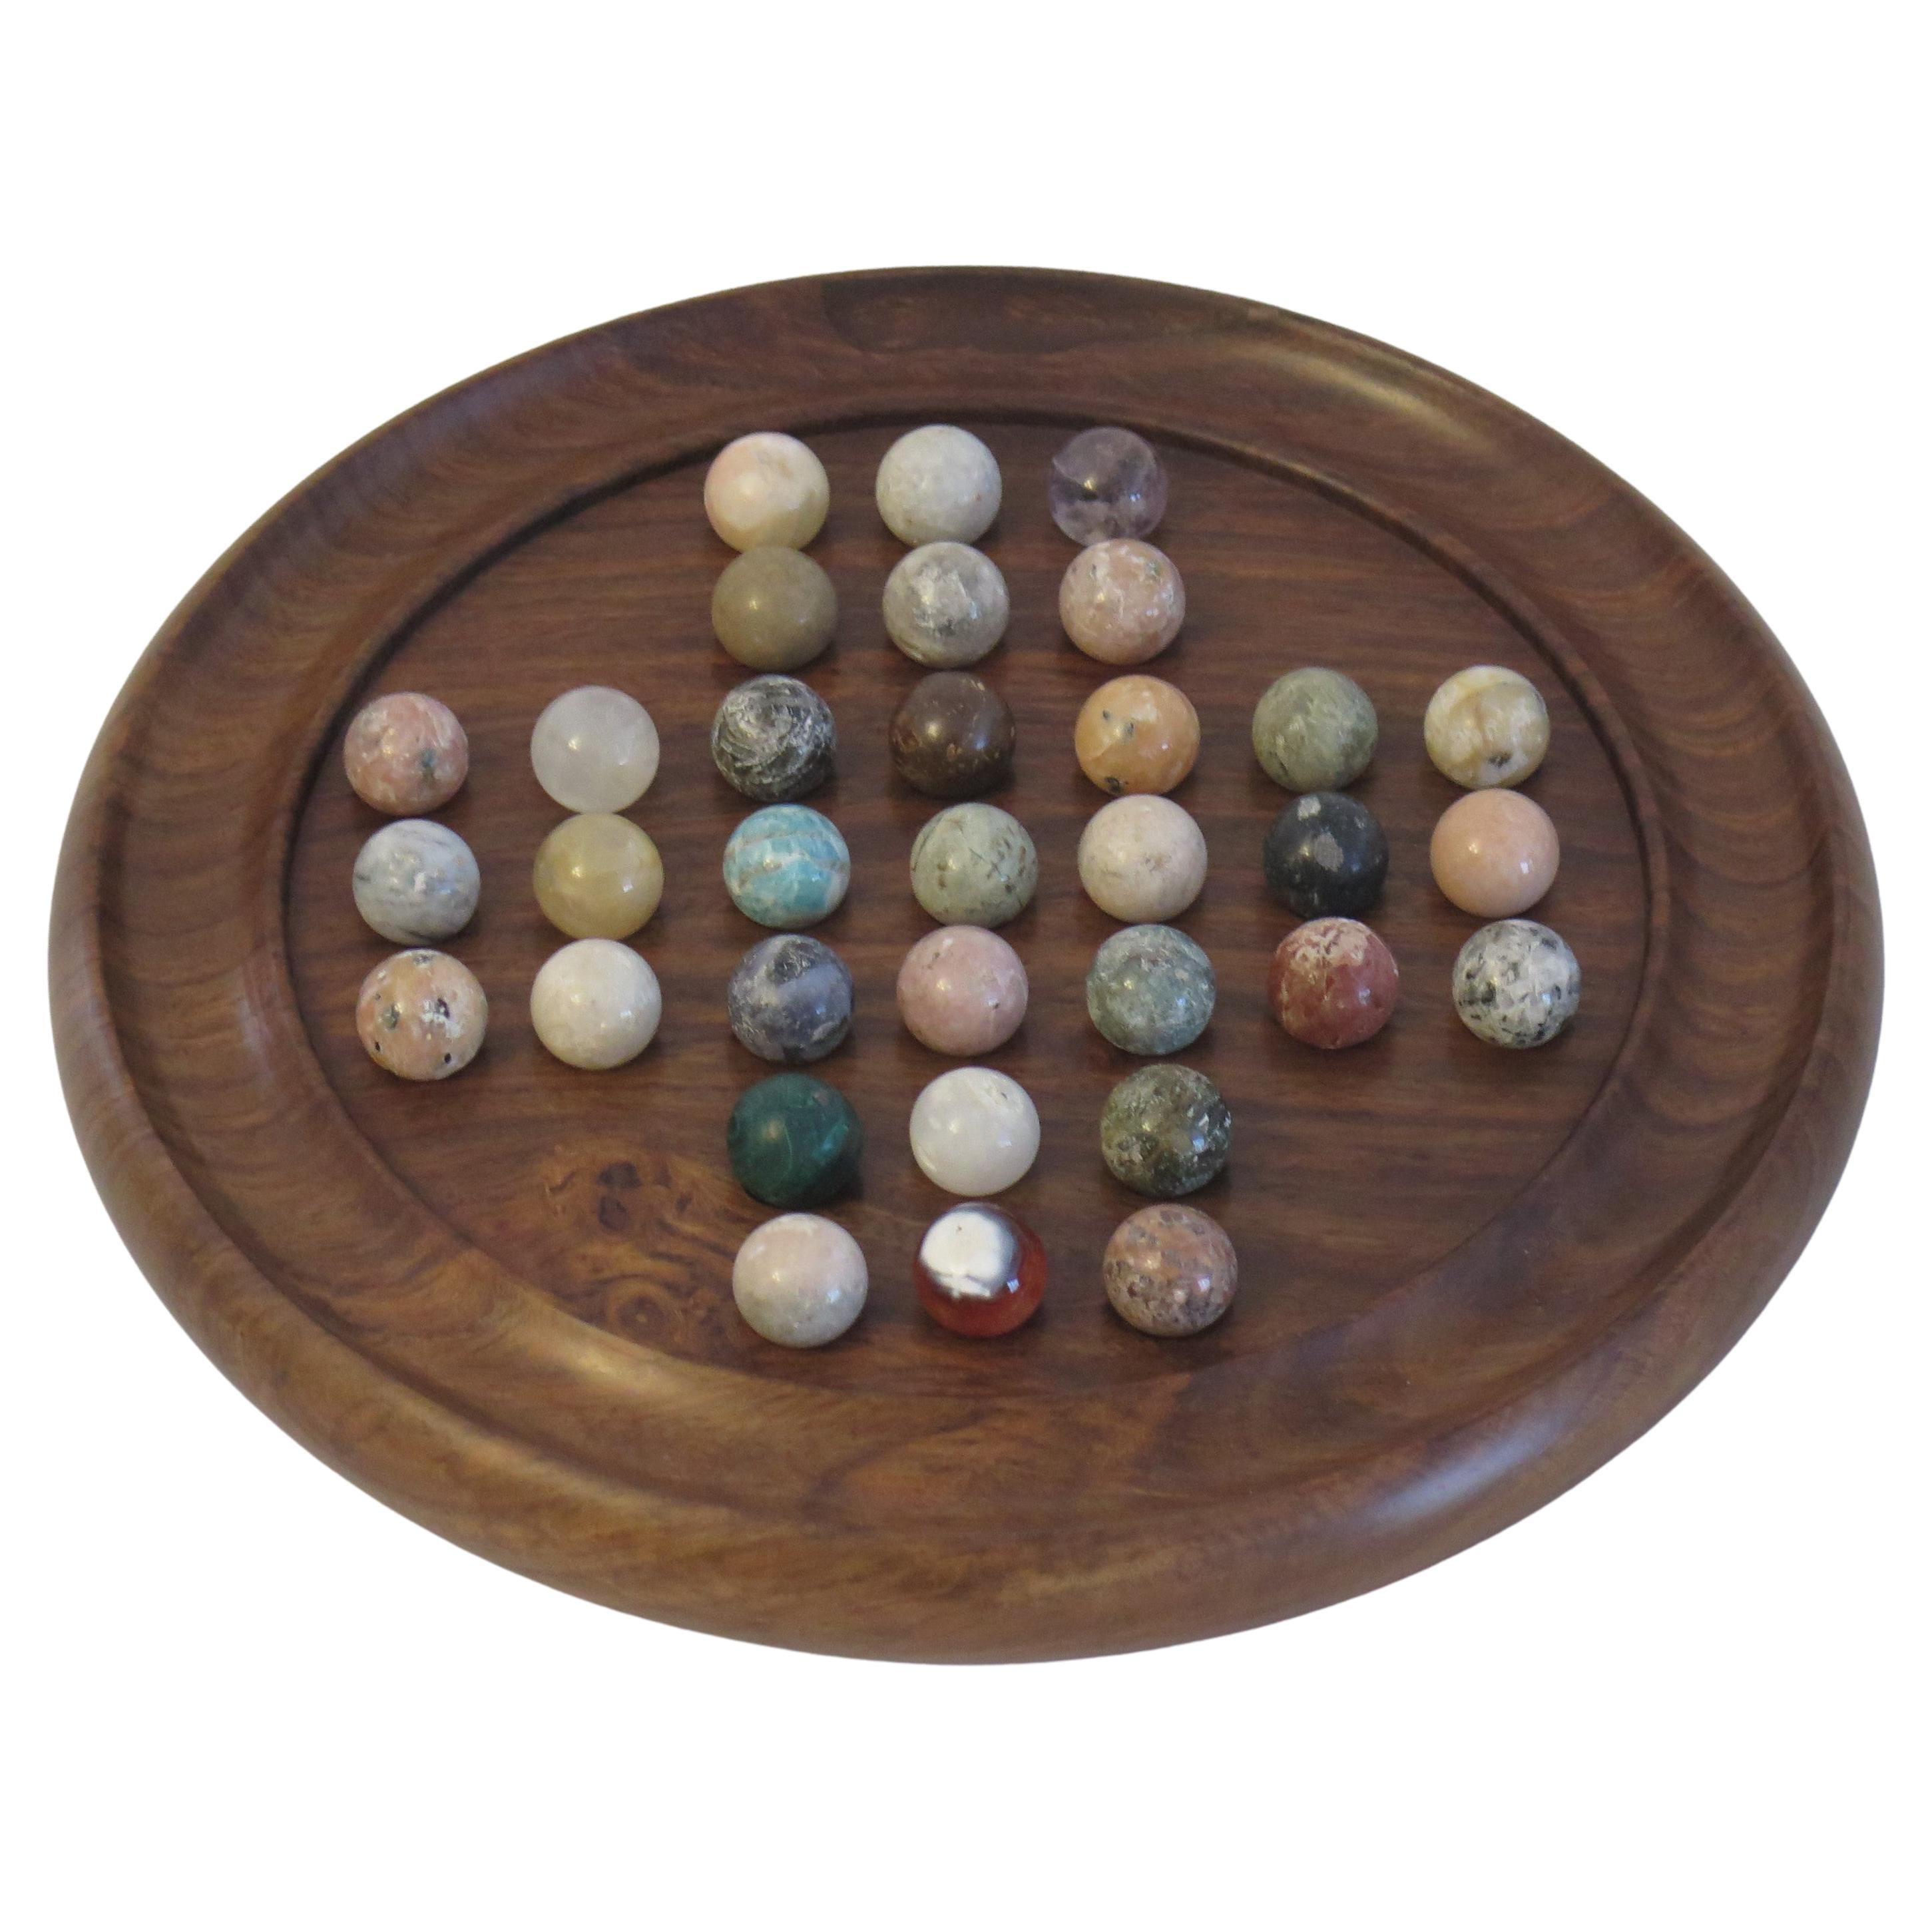 Marble Solitaire Game Hardwood Board 33 Agate Mineral Stone Marbles, circa 1930s